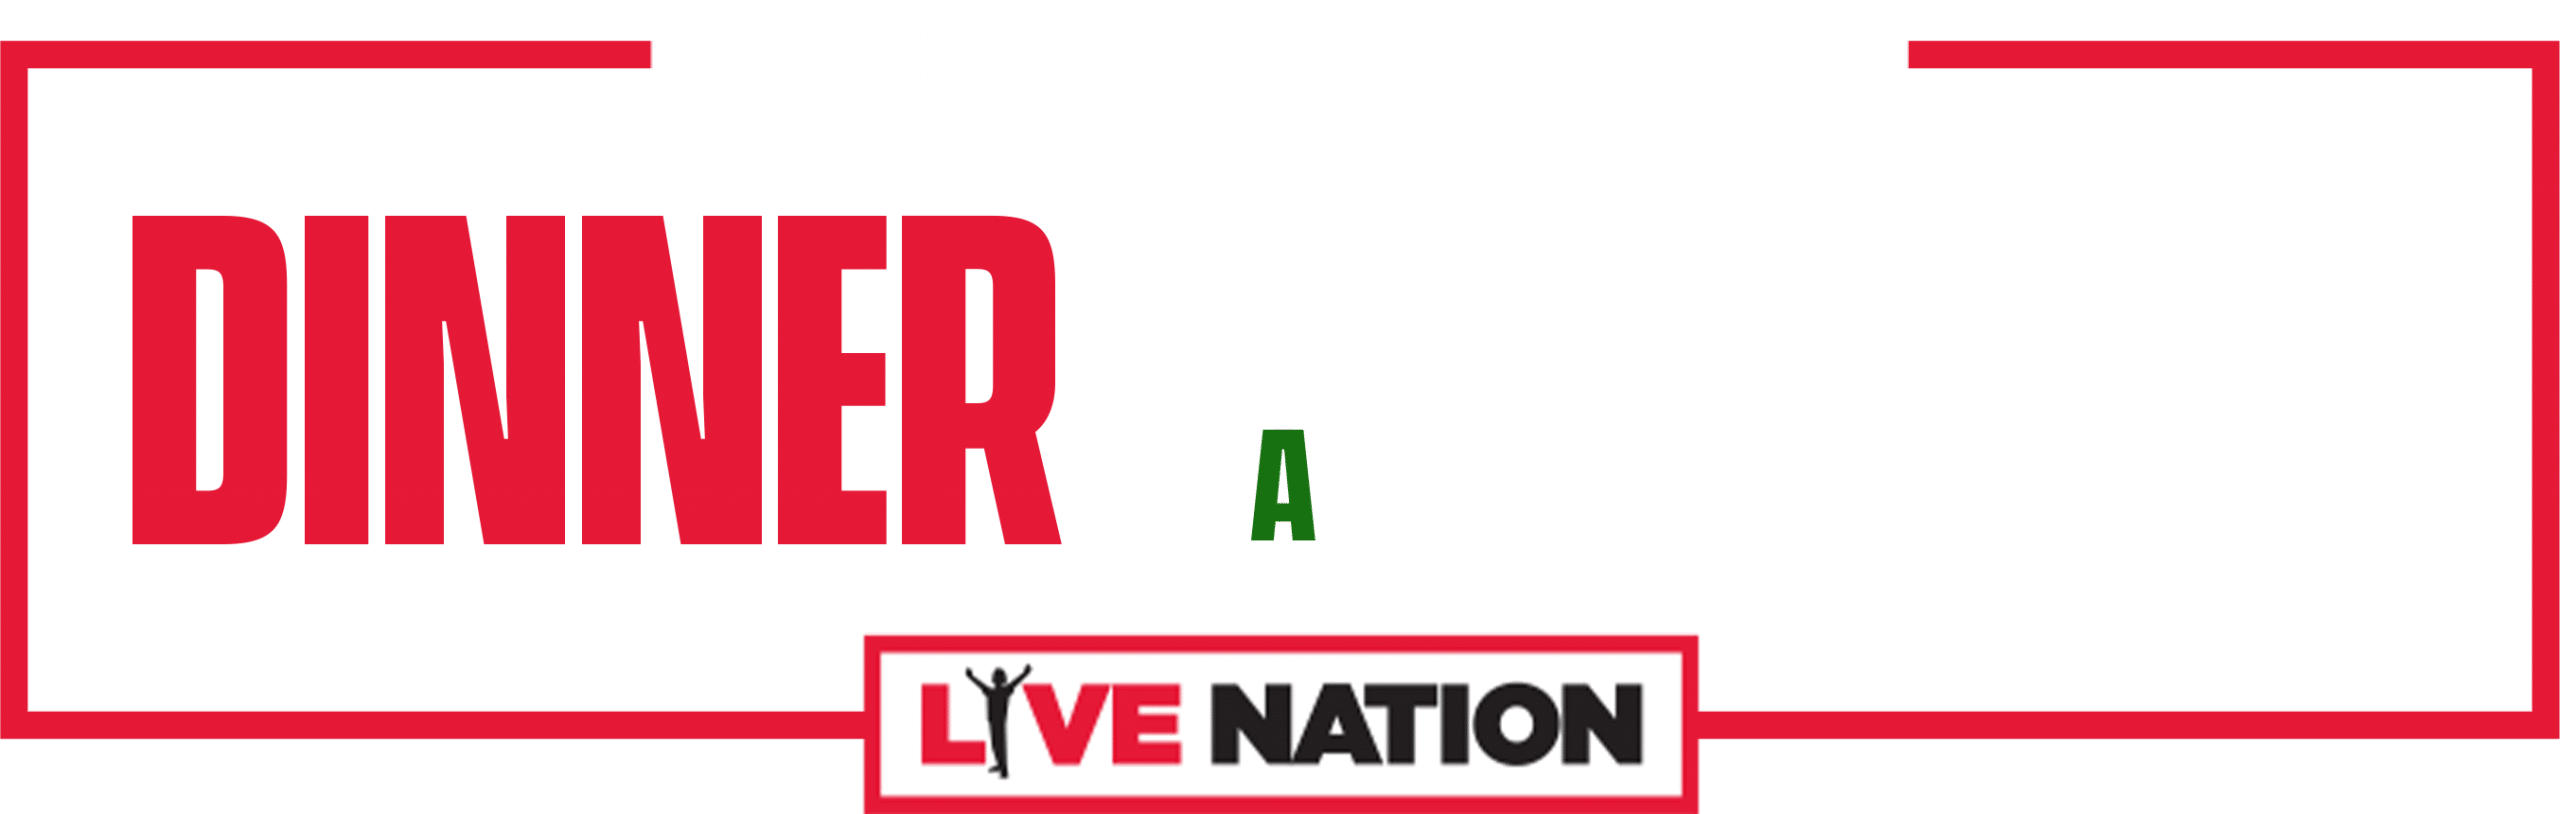 2 Dinner and a show logo